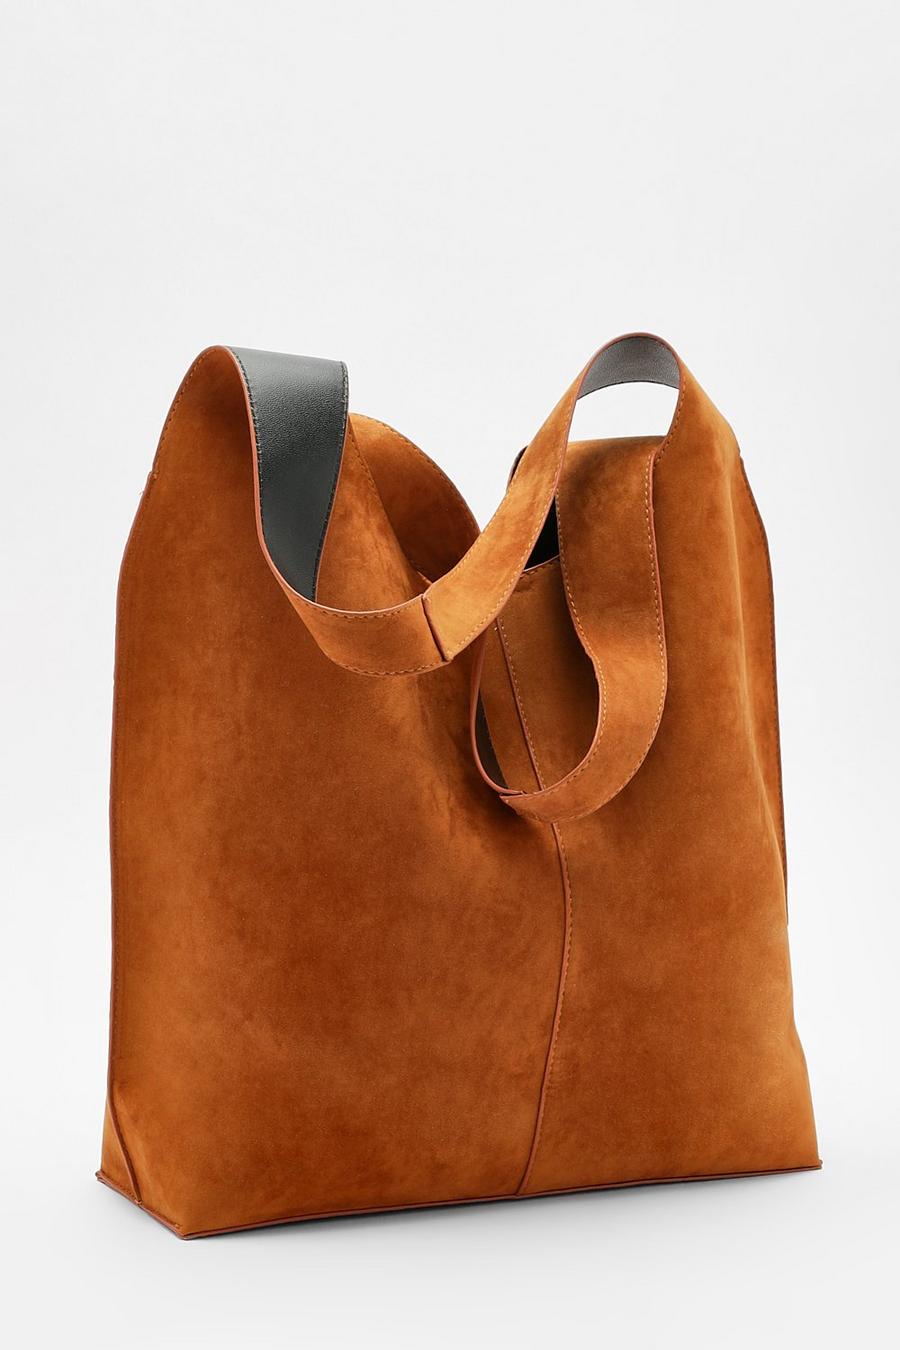 Tan brown Suedette Slouch Tote Bag